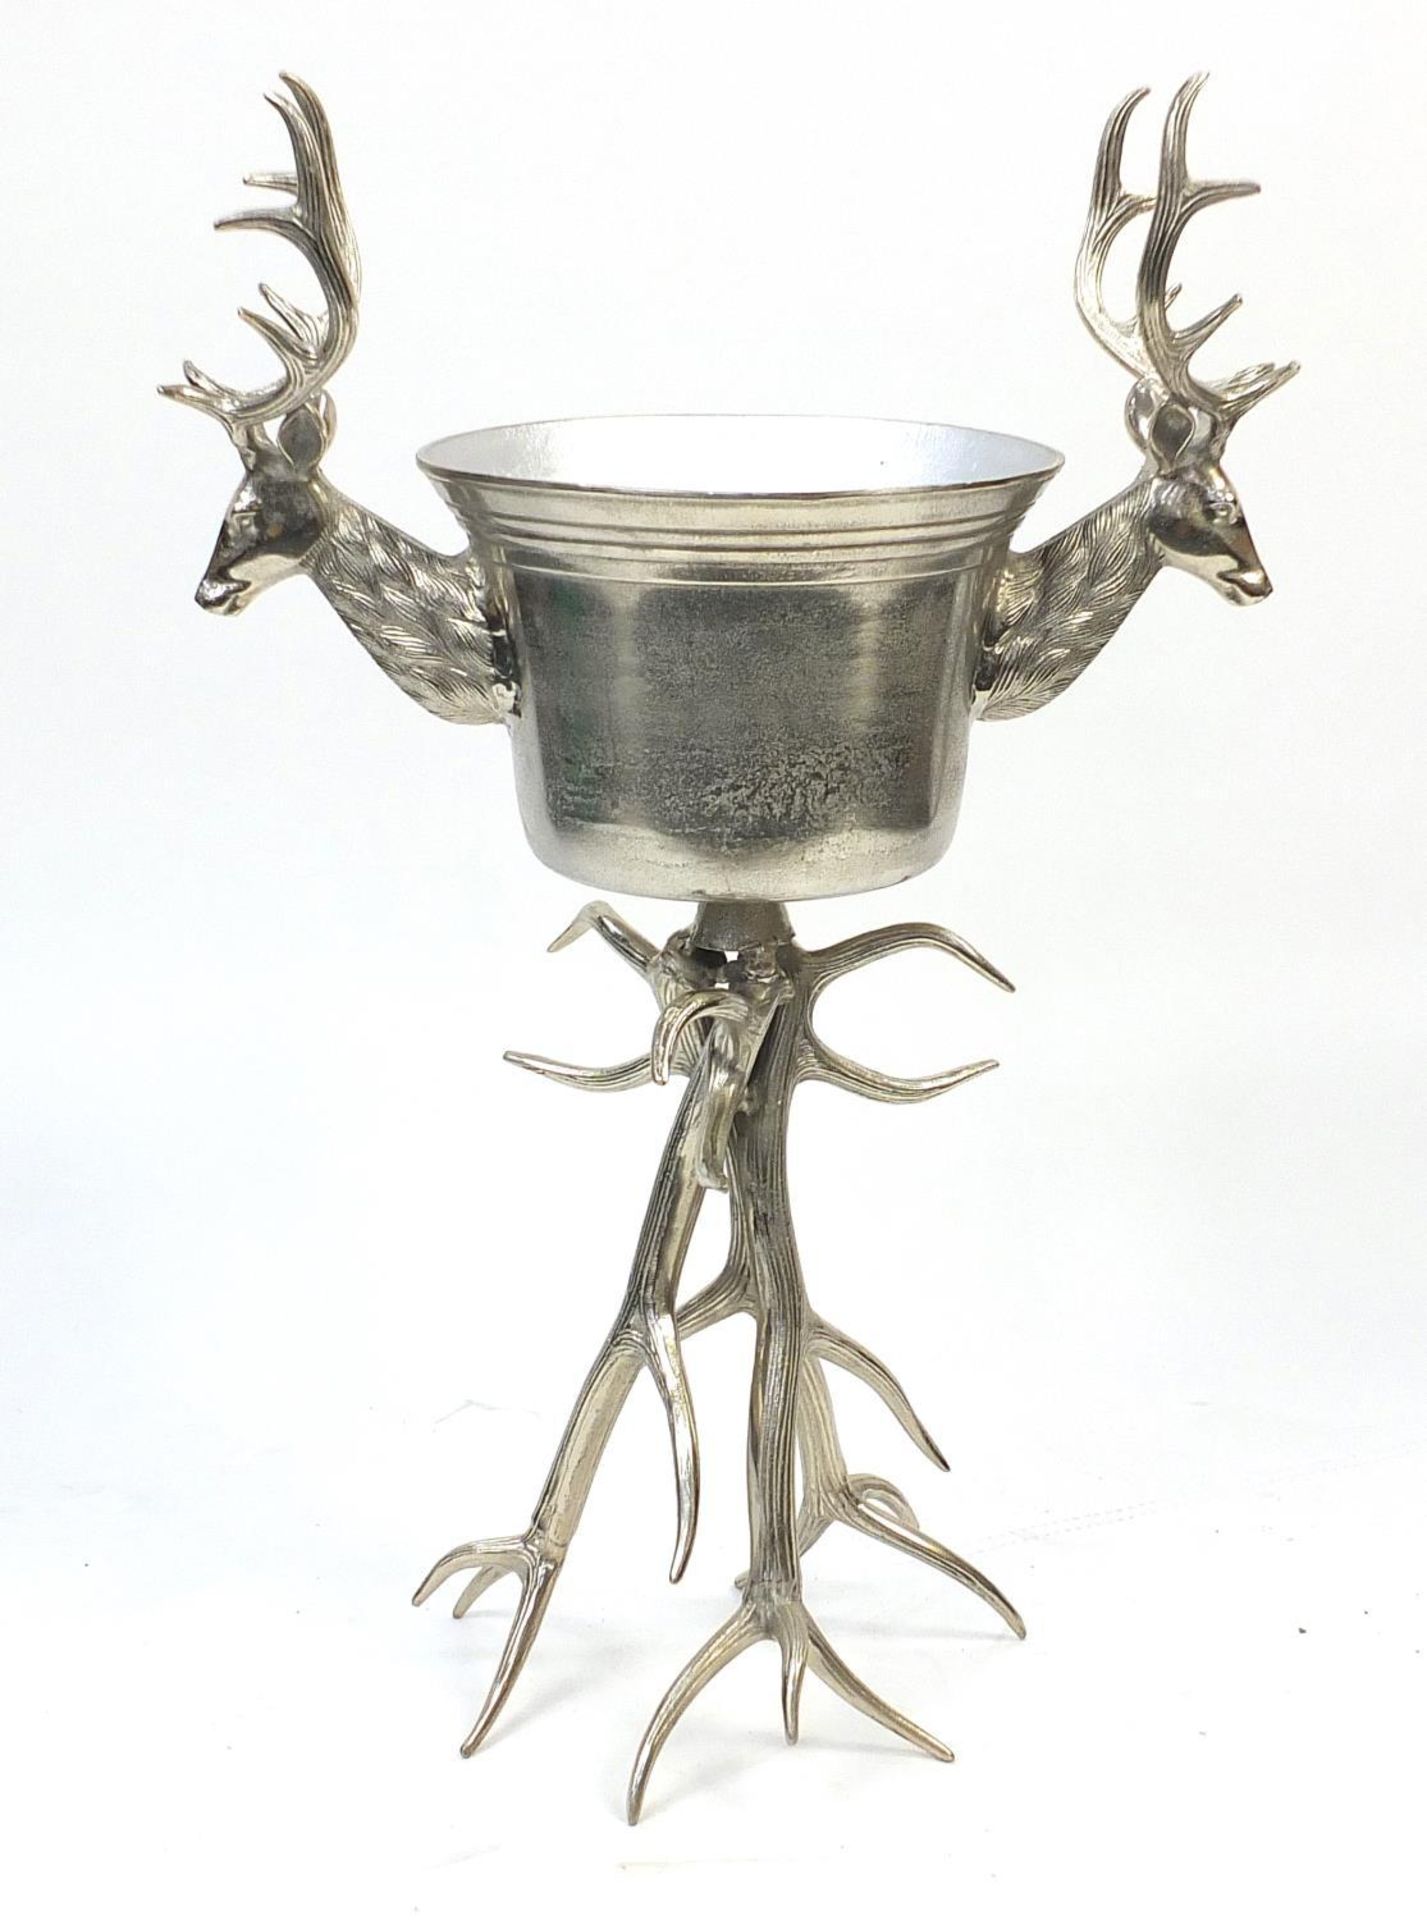 Silvered staghorn design floor standing ice bucket with stag's heads, 104.5 high x 70cm wide : - Image 4 of 4